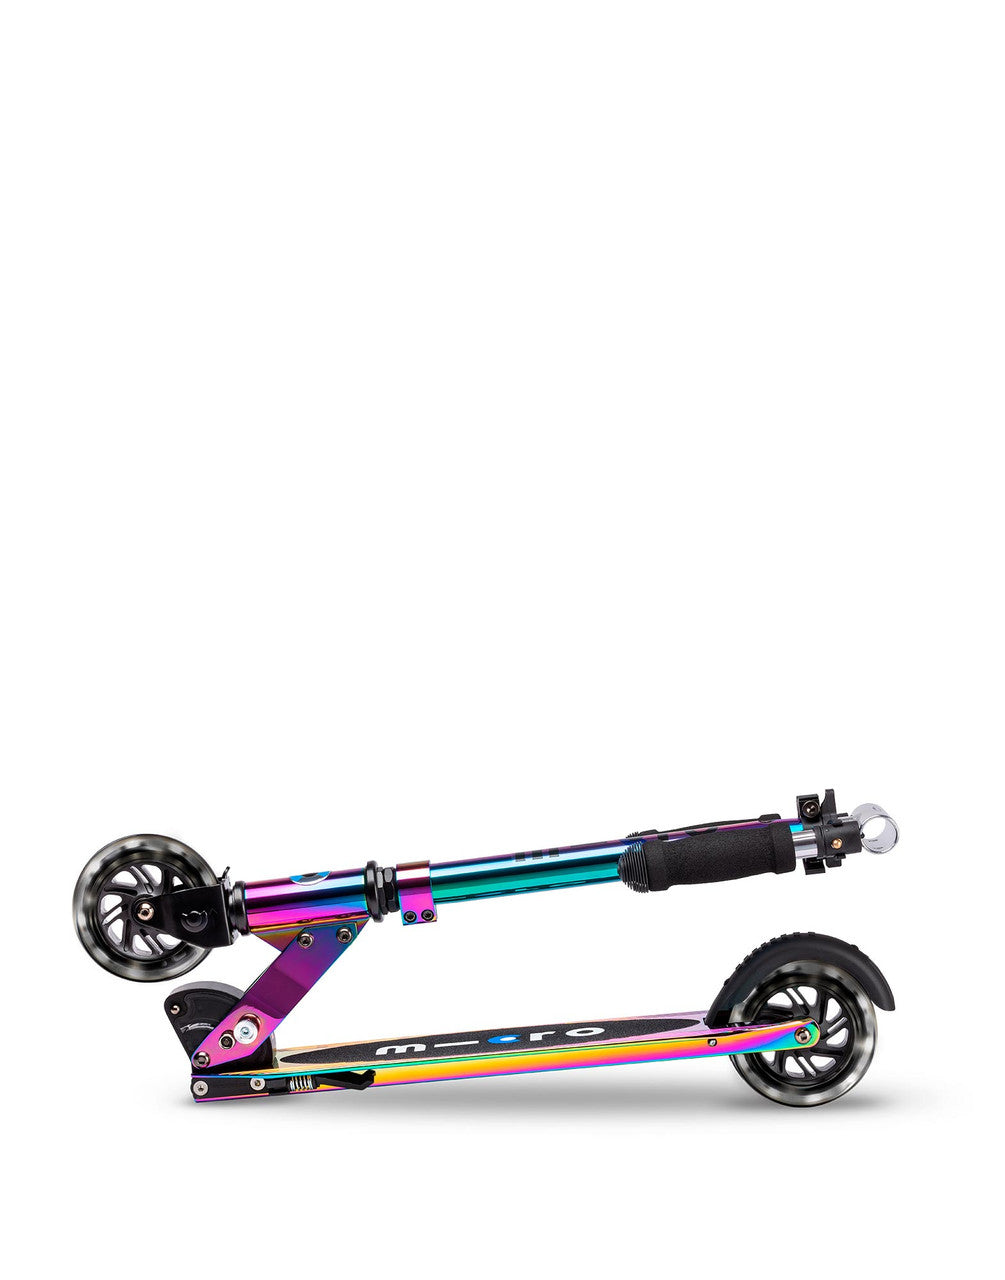 MICRO SCOOTER - Sprite Light Up Neochrome Scooter